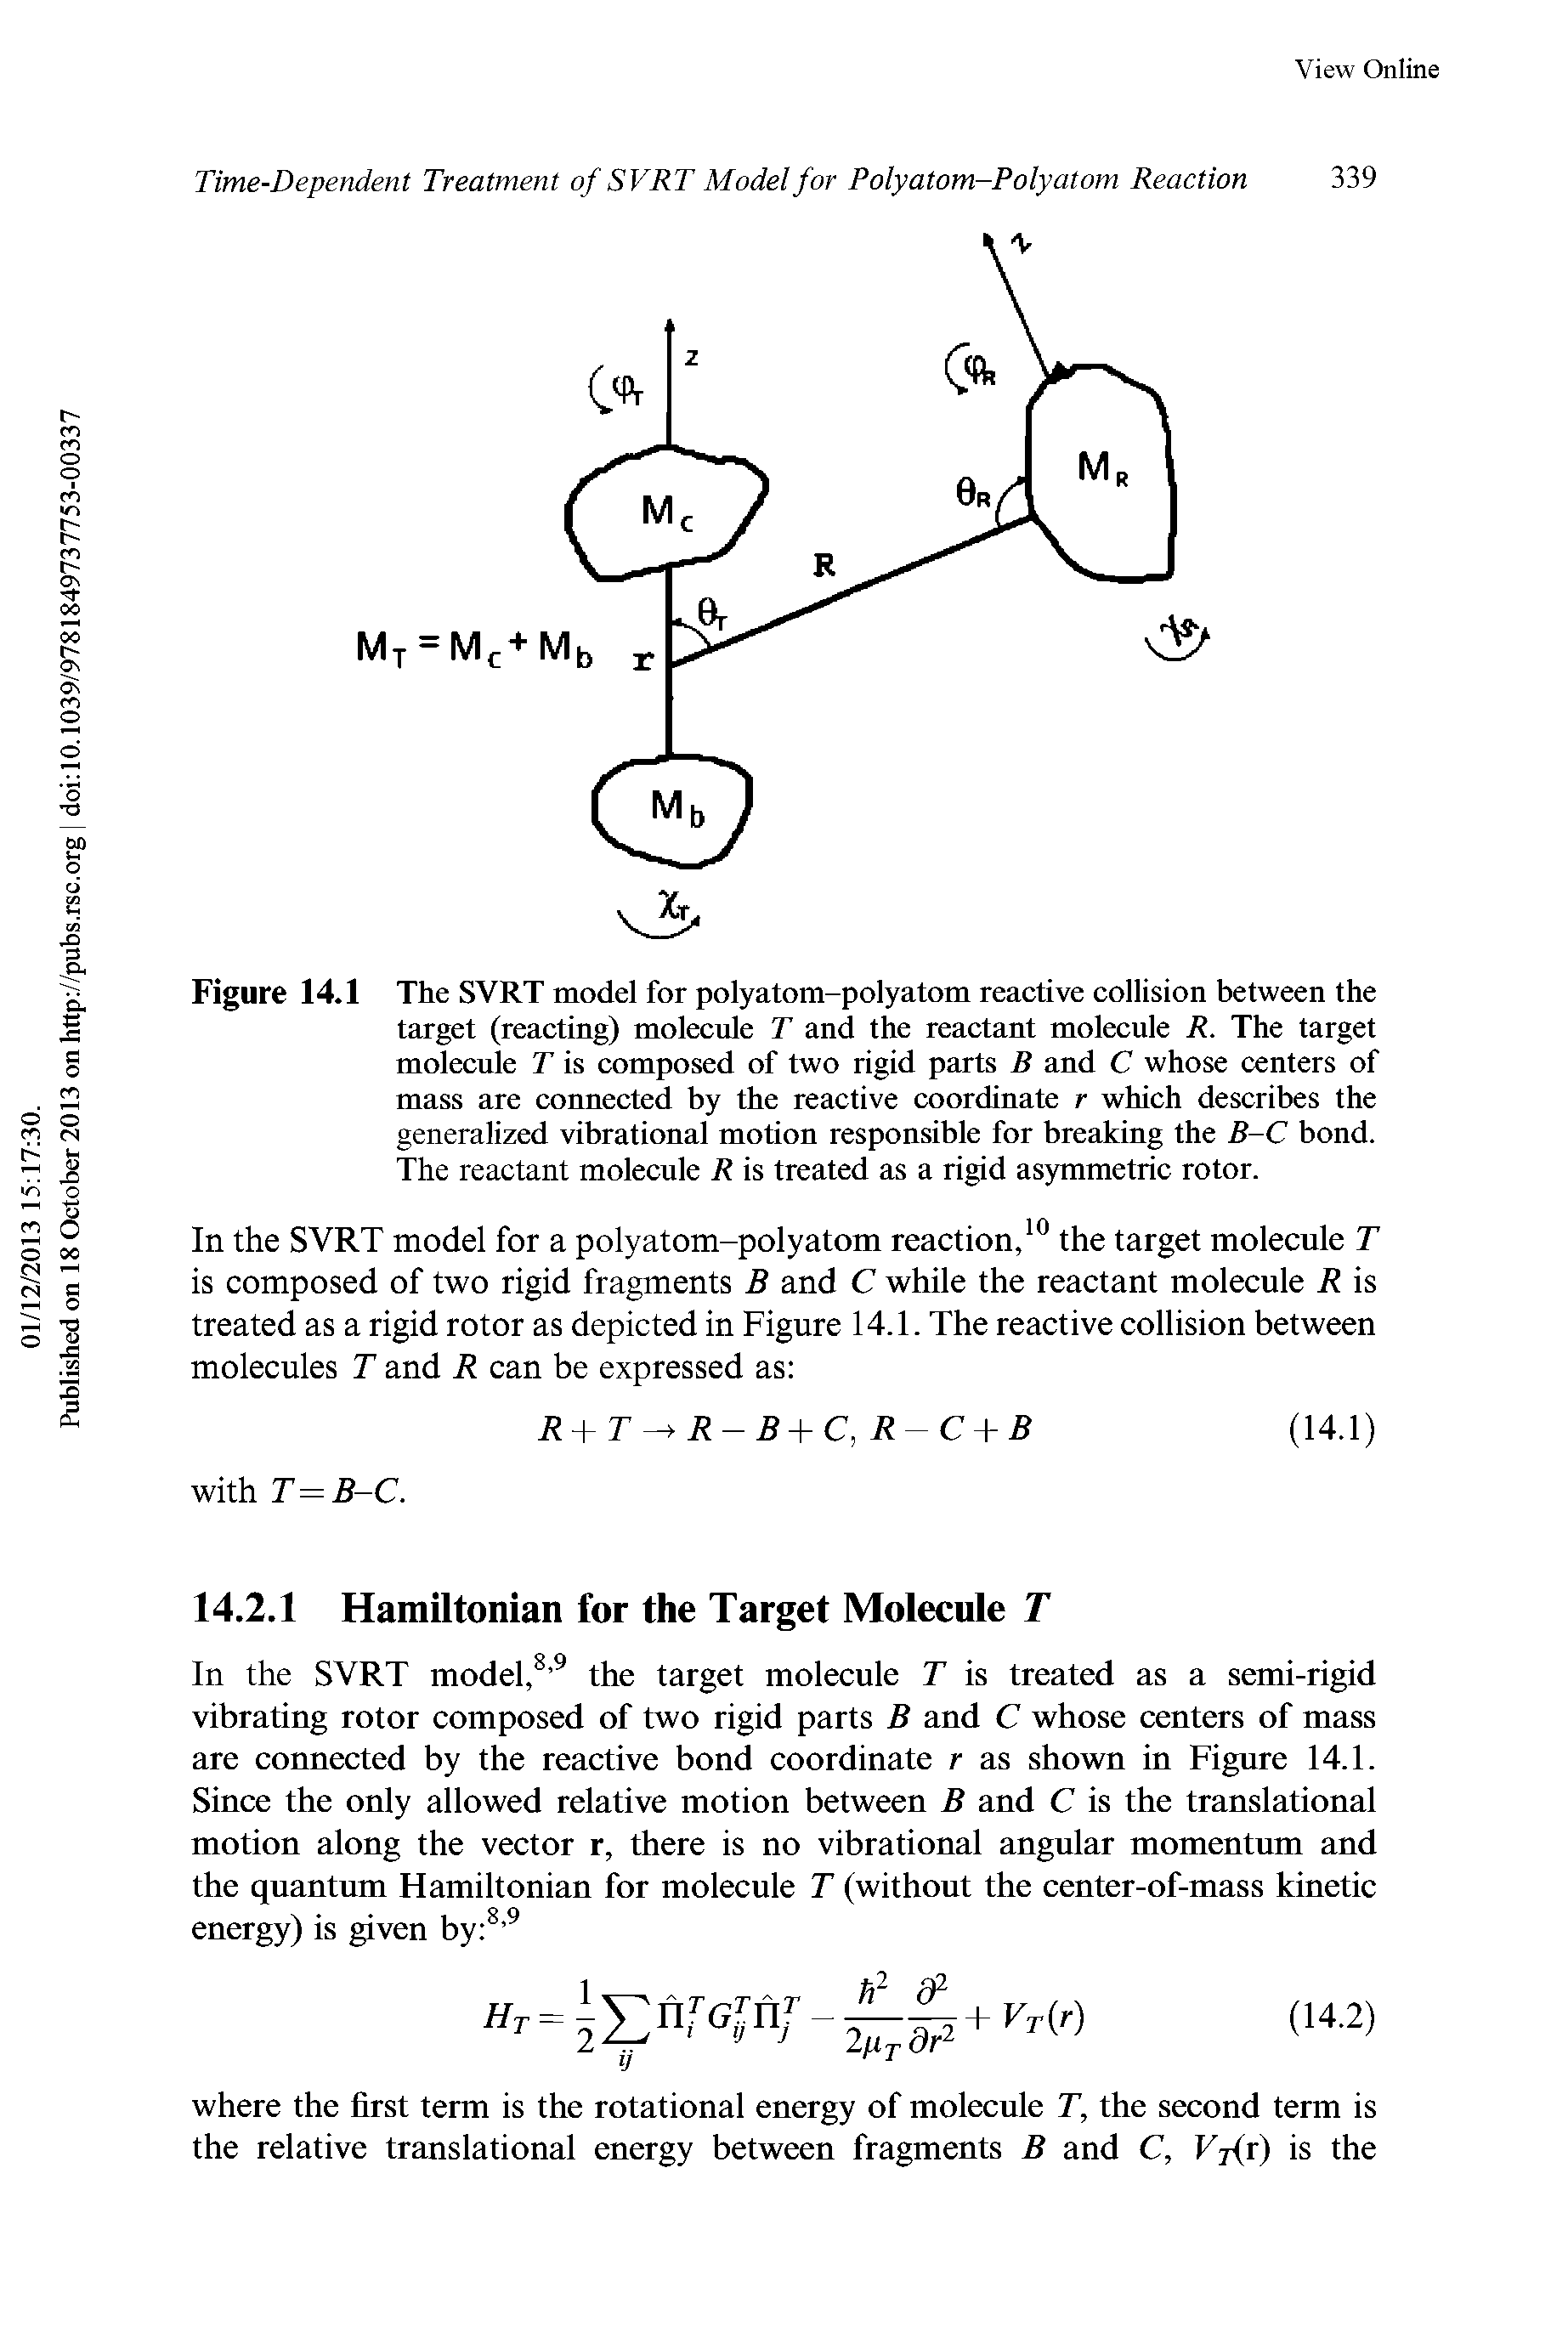 Figure 14.1 The SVRT model for polyatom-polyatom reactive collision between the target (reacting) molecule T and the reactant molecule R. The target molecule T is composed of two rigid parts B and C whose centers of mass are connected by the reactive coordinate r which describes the generalized vibrational motion responsible for breaking the B-C bond. The reactant molecule R is treated as a rigid asymmetric rotor.